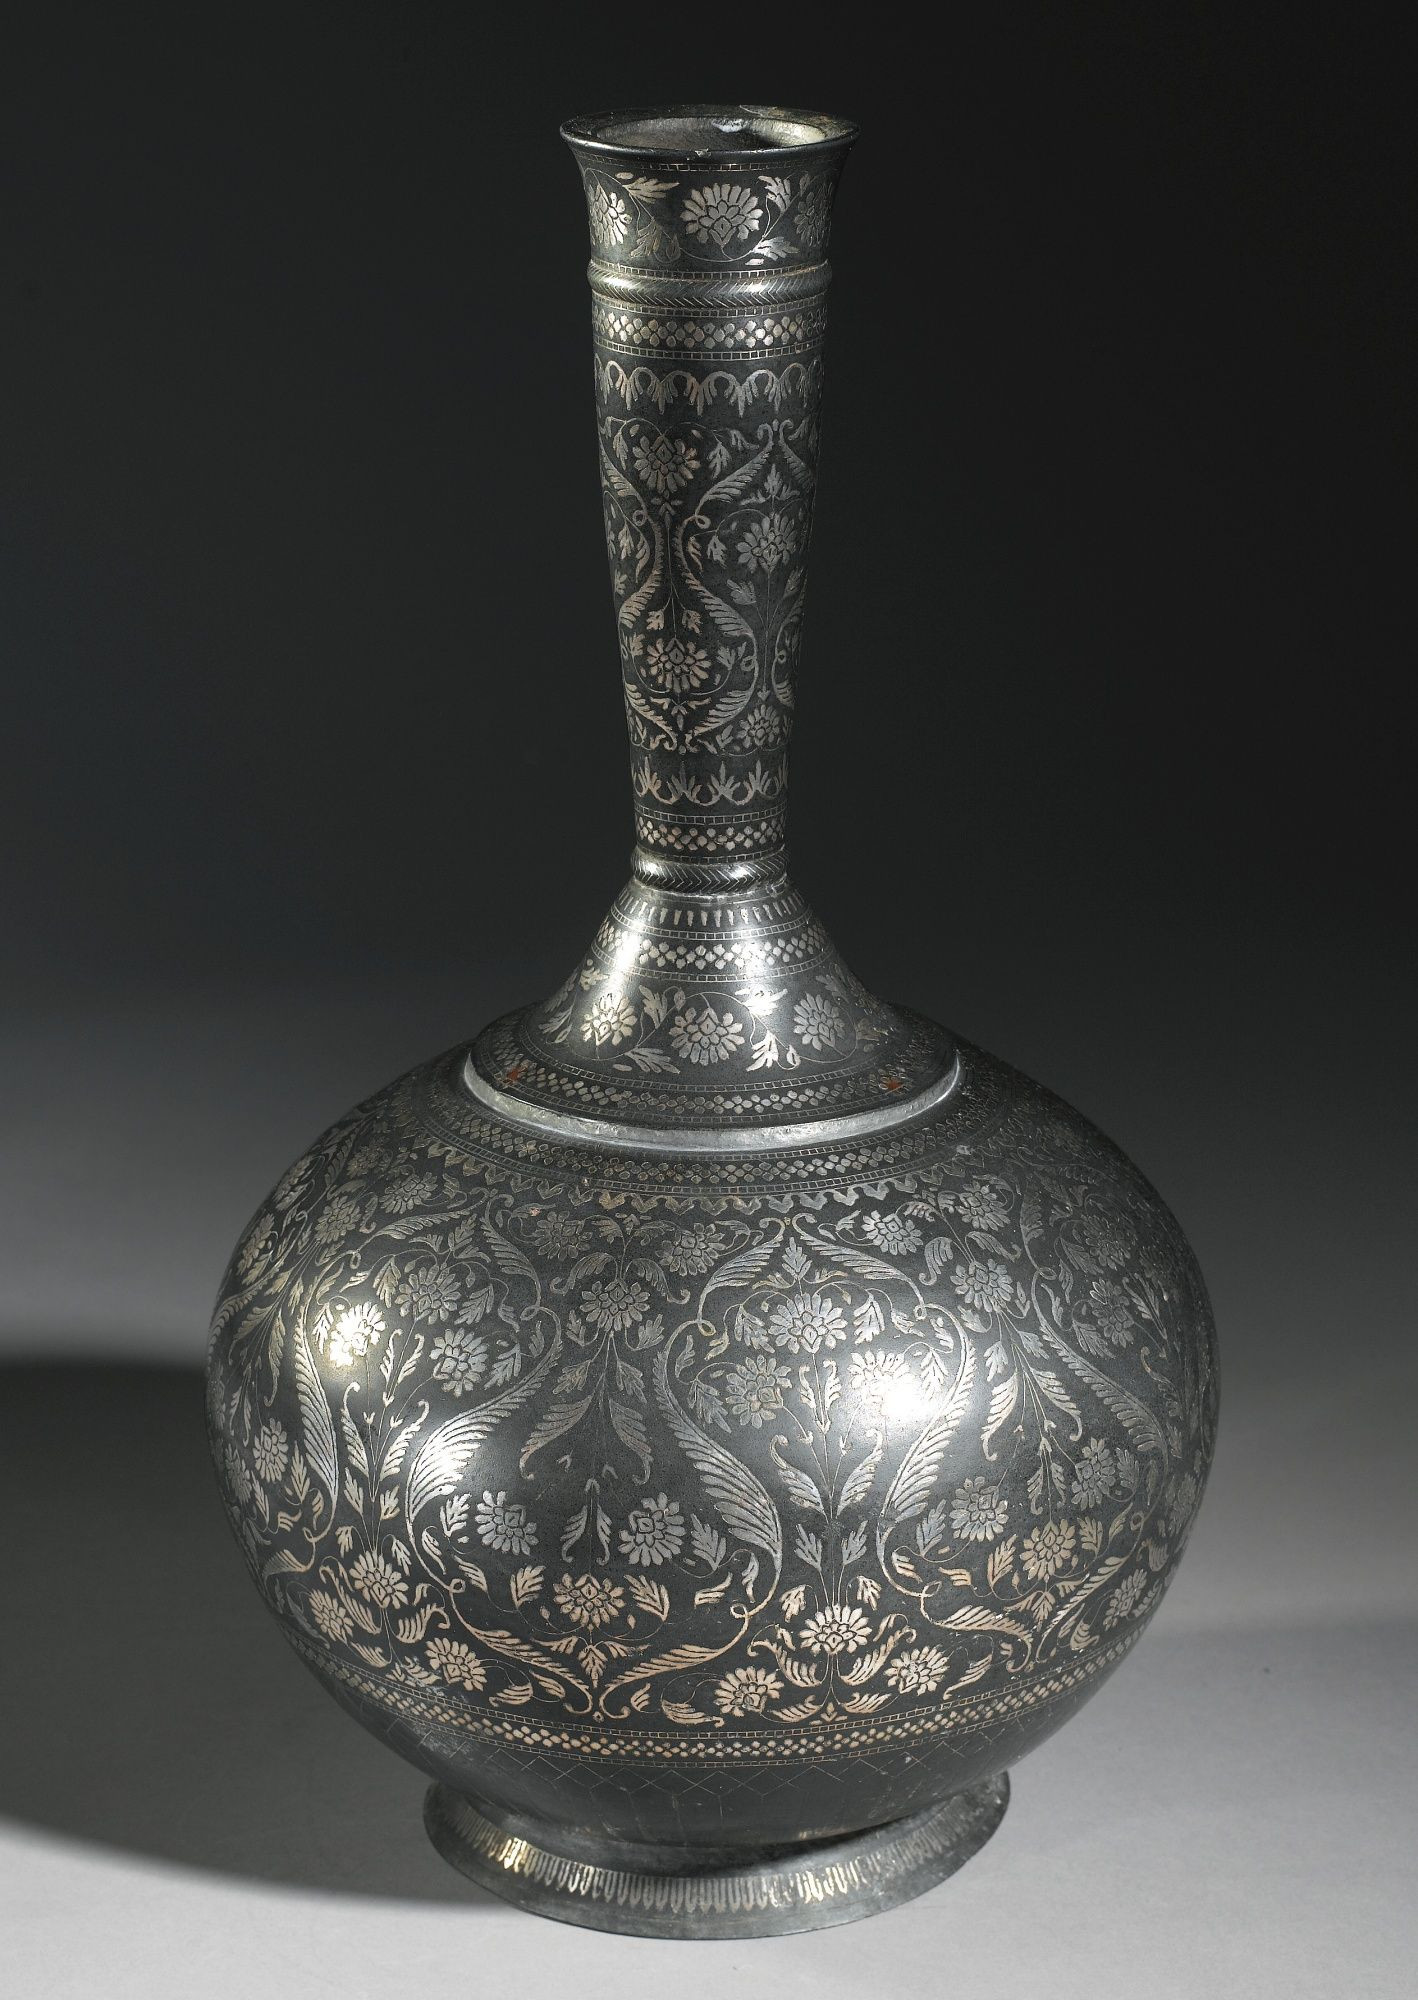 21 Stylish Brass Vase India 2024 free download brass vase india of a monumental bidriware bottle vase india 19th century the globular with a monumental bidriware bottle vase india 19th century the globular body on a thin everted foot wit